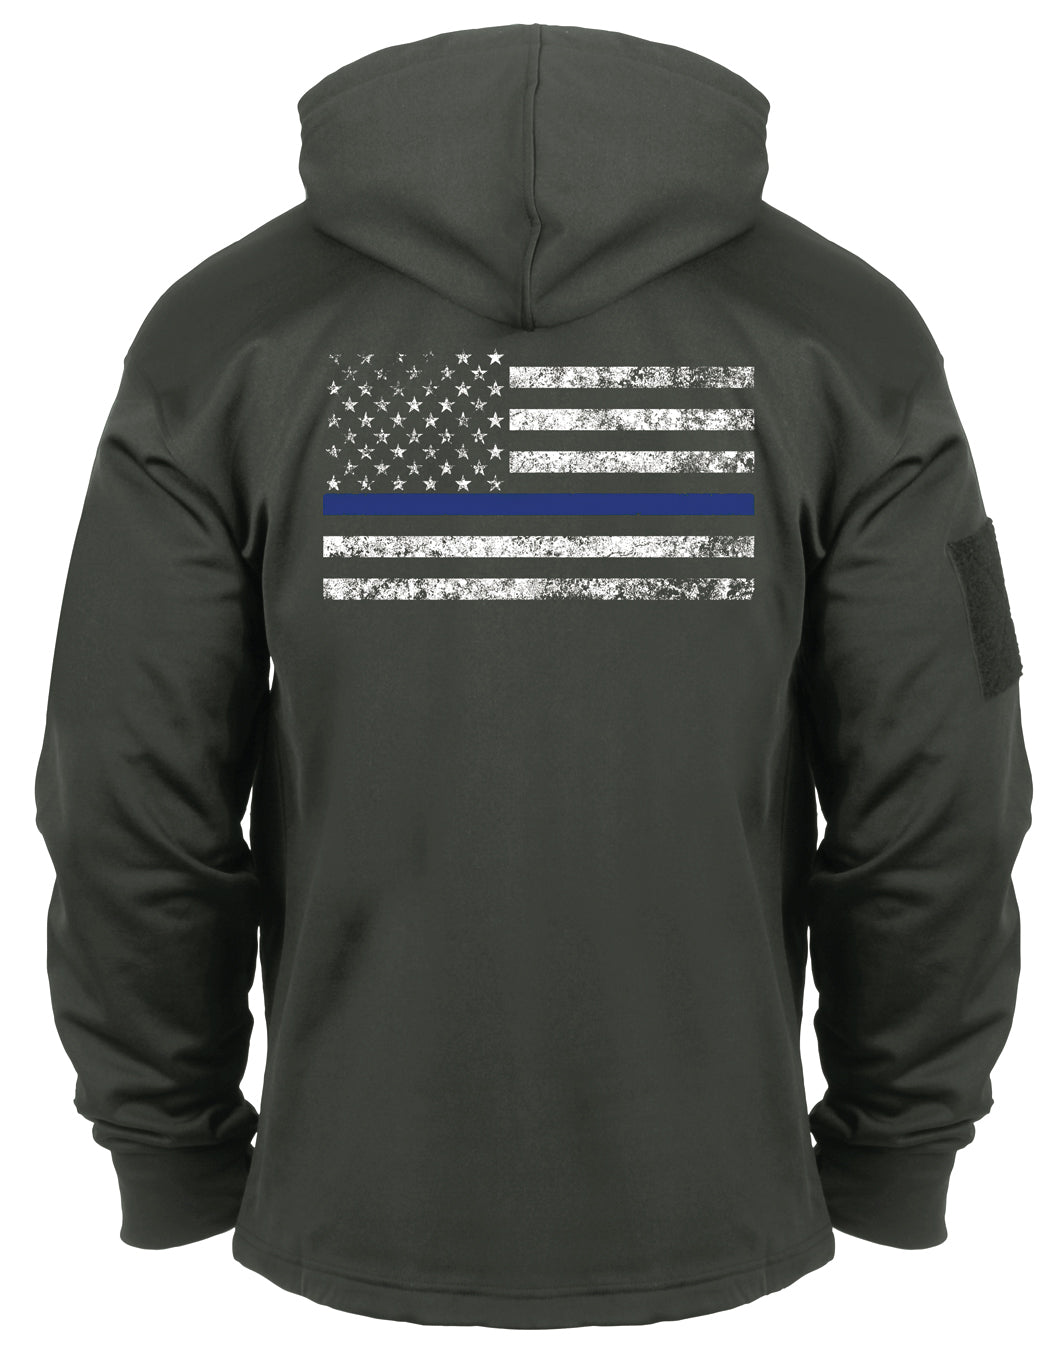 Rothco Mens Thin Blue Line Police Sweat Shirt Concealed Carry Hoodie Sweatshirt